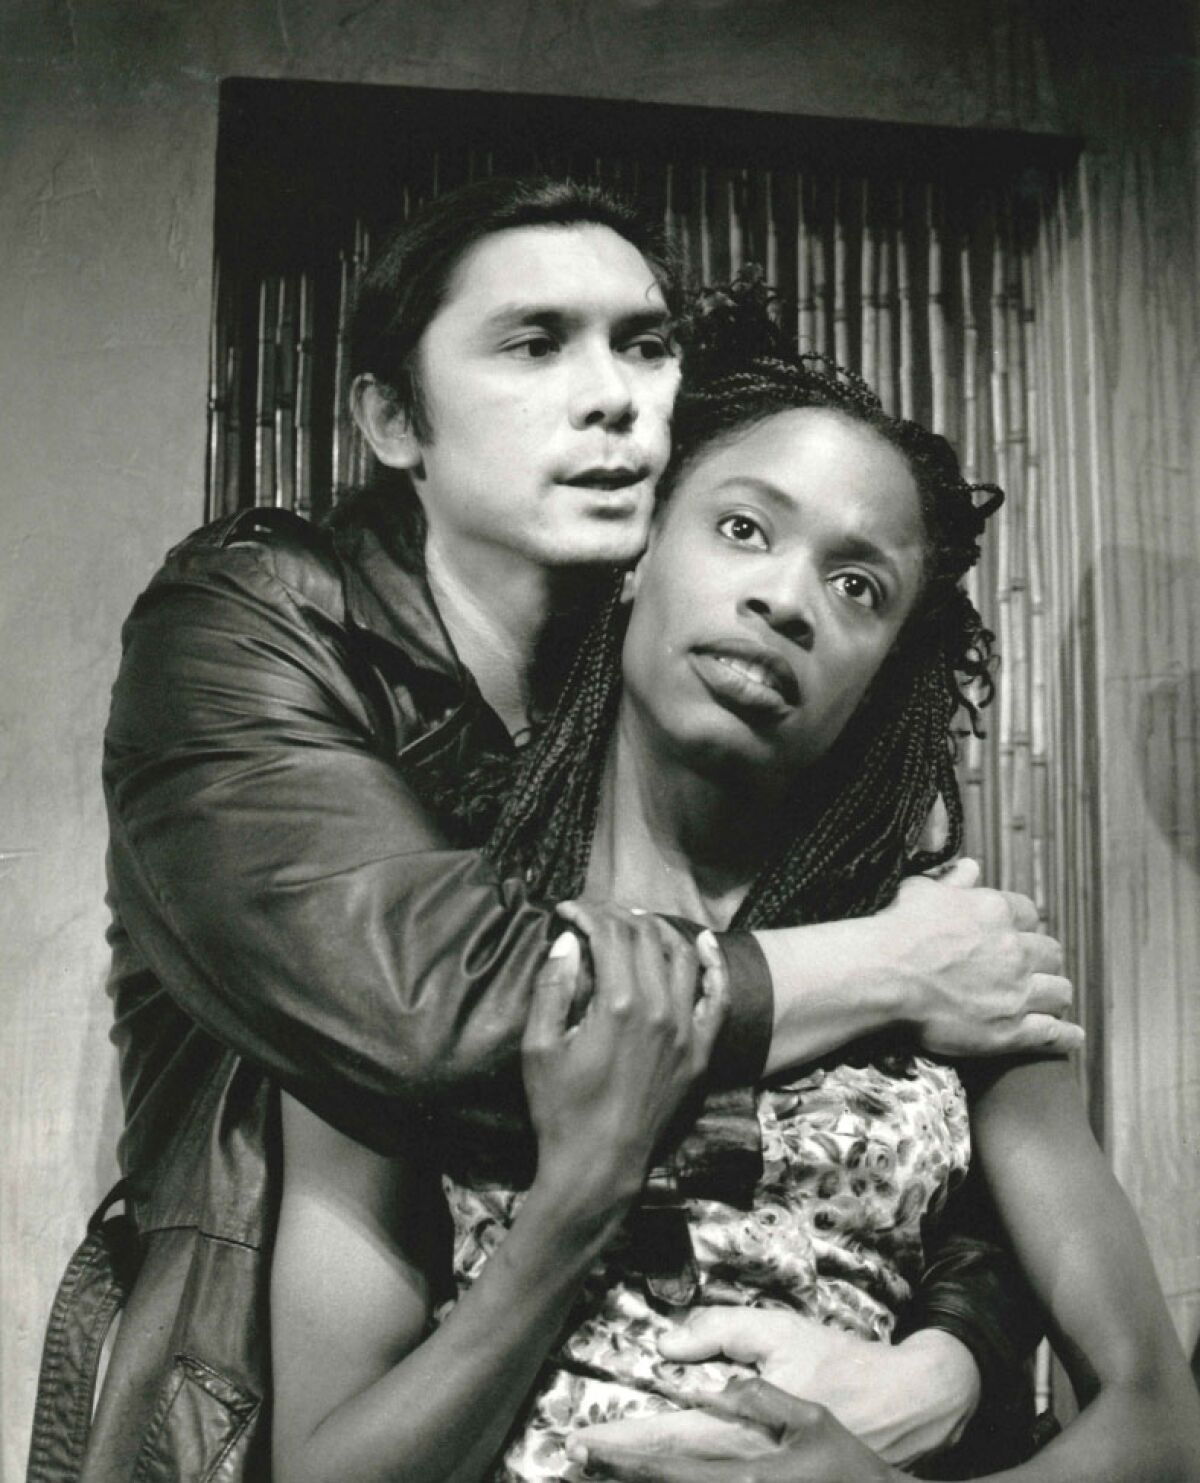 Charlayne Woodard appears with Lou Diamond Phillips in La Jolla Playhouse's "The Good Person of Setzuan" in 1994.